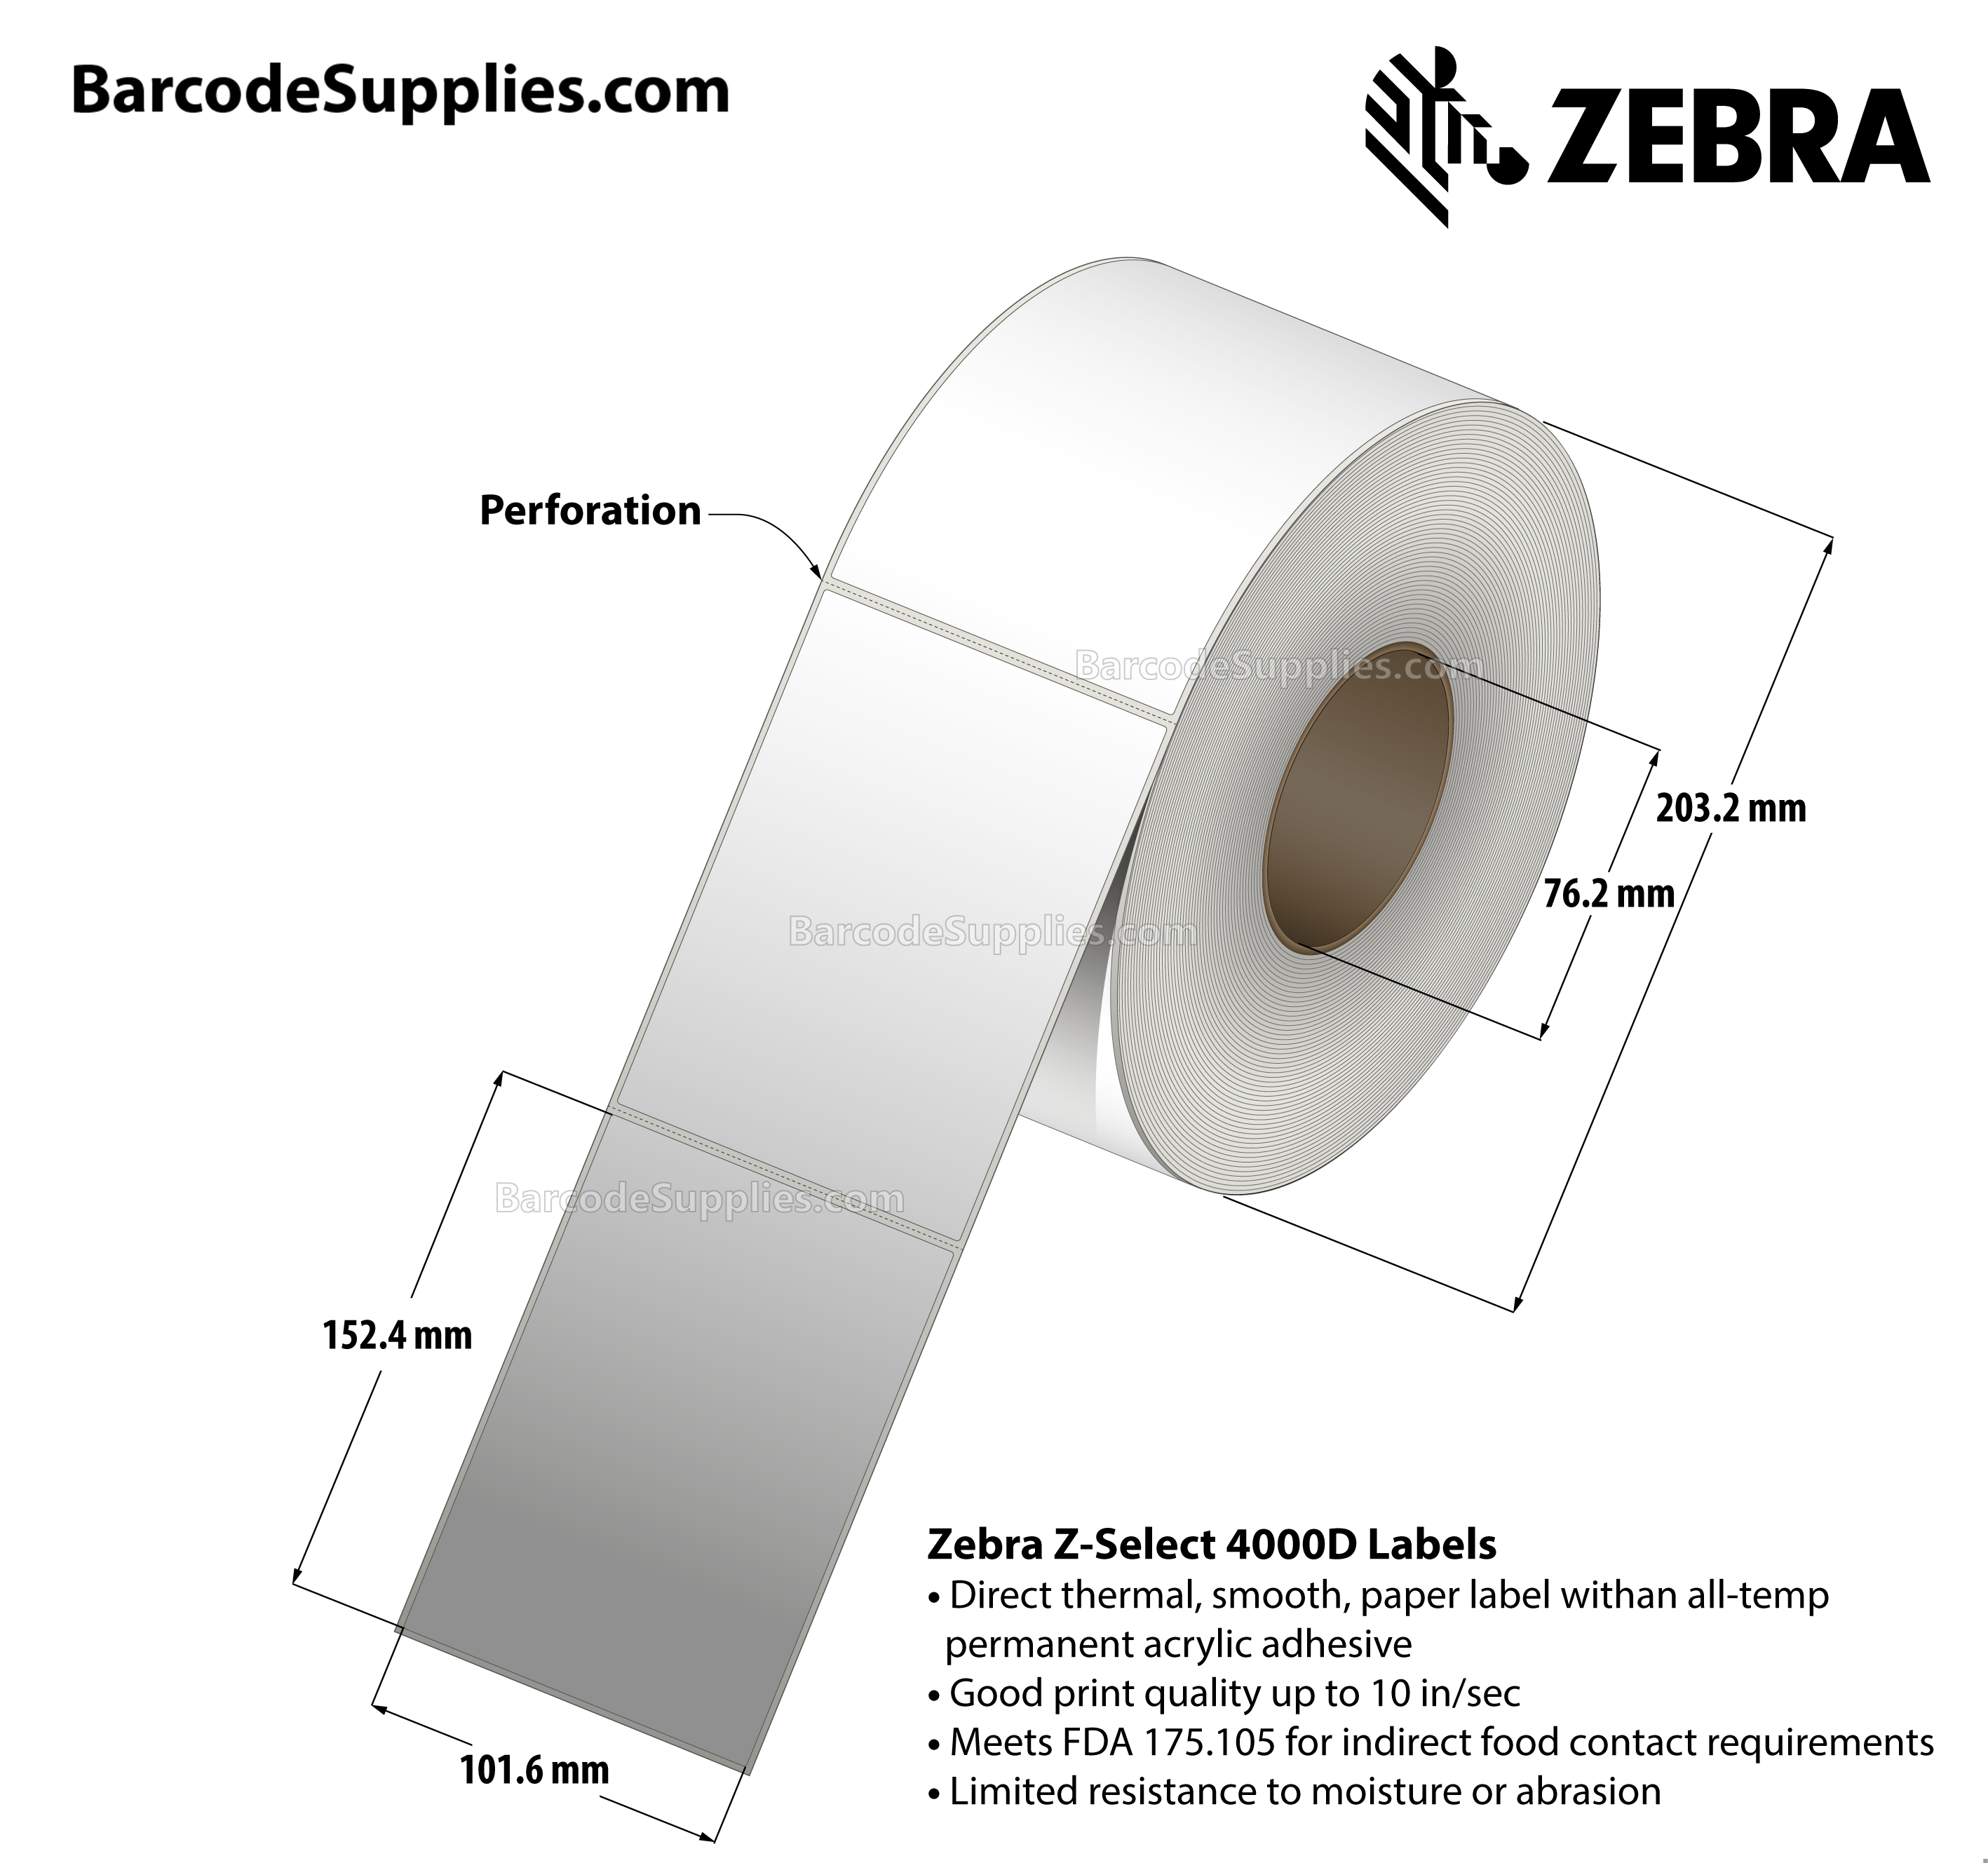 4 x 6 Direct Thermal White Z-Select 4000D Labels With All-Temp Adhesive - Perforated - 940 Labels Per Roll - Carton Of 4 Rolls - 3760 Labels Total - MPN: 98959